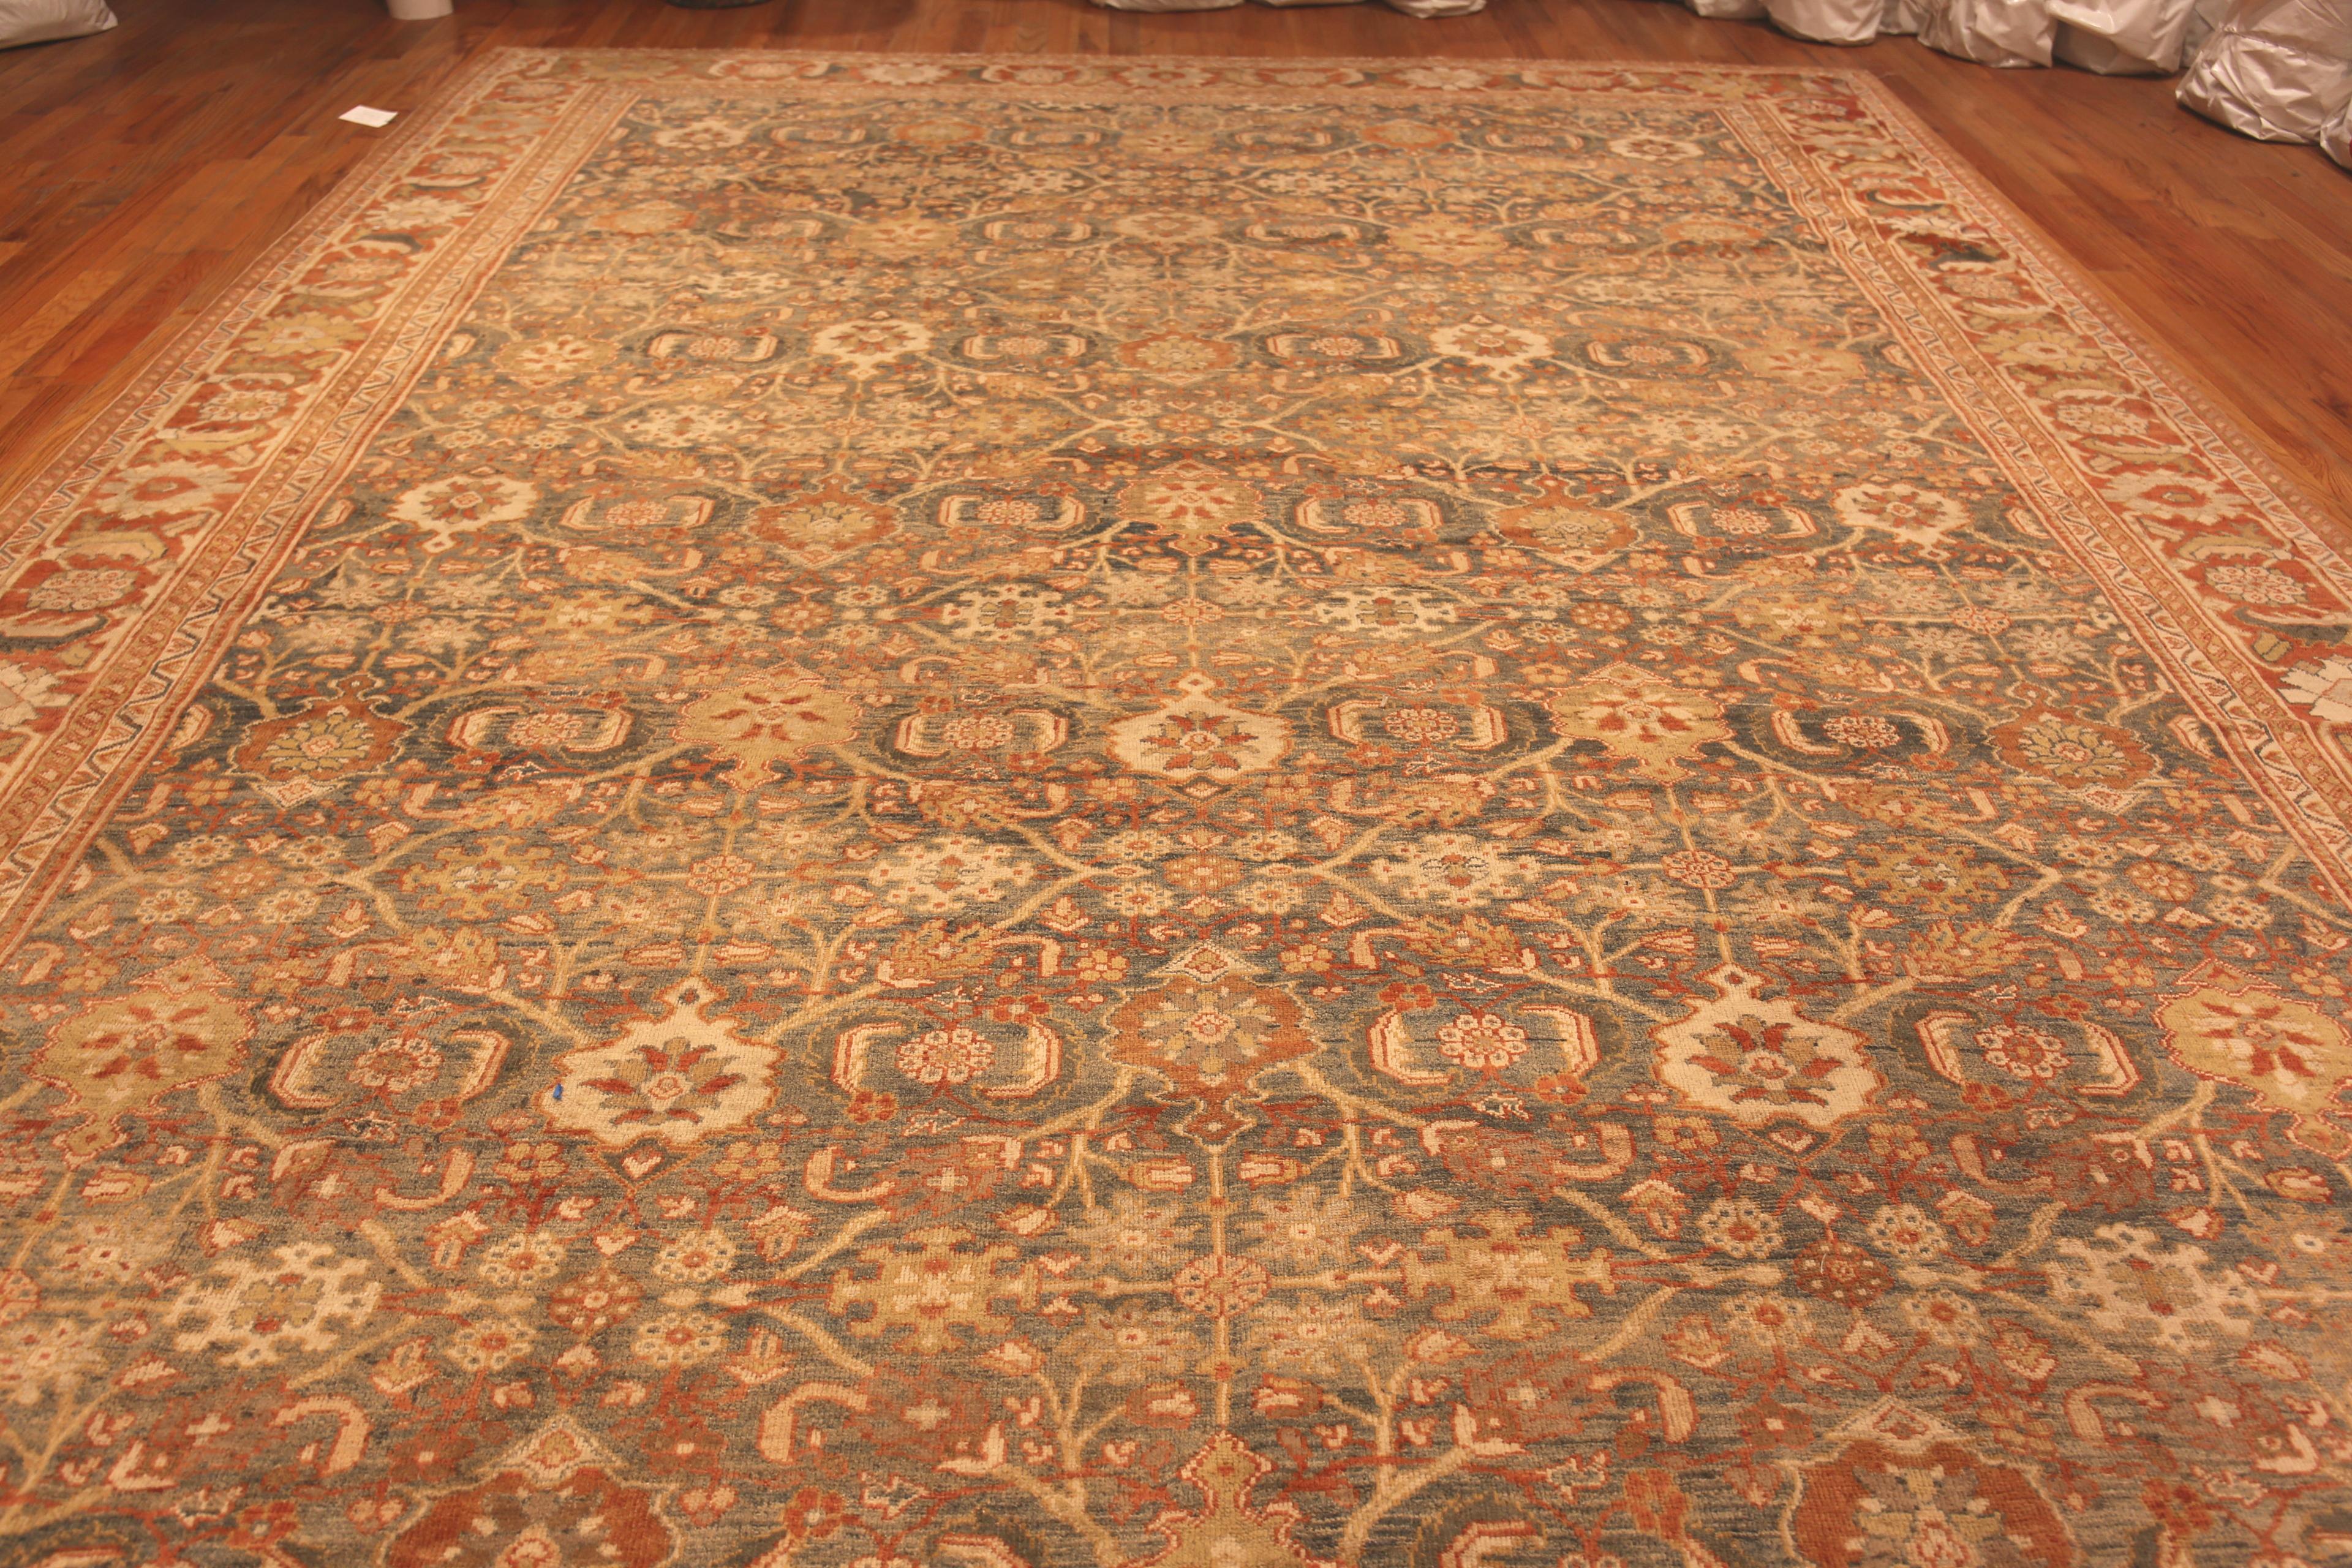 Oversized Antique Persian Sultanabad Rug, Country of Origin: Persian Rugs. Circa date: 1900. Size: 11 ft 10 in x 21 ft 4 in (3.61 m x 6.5 m)